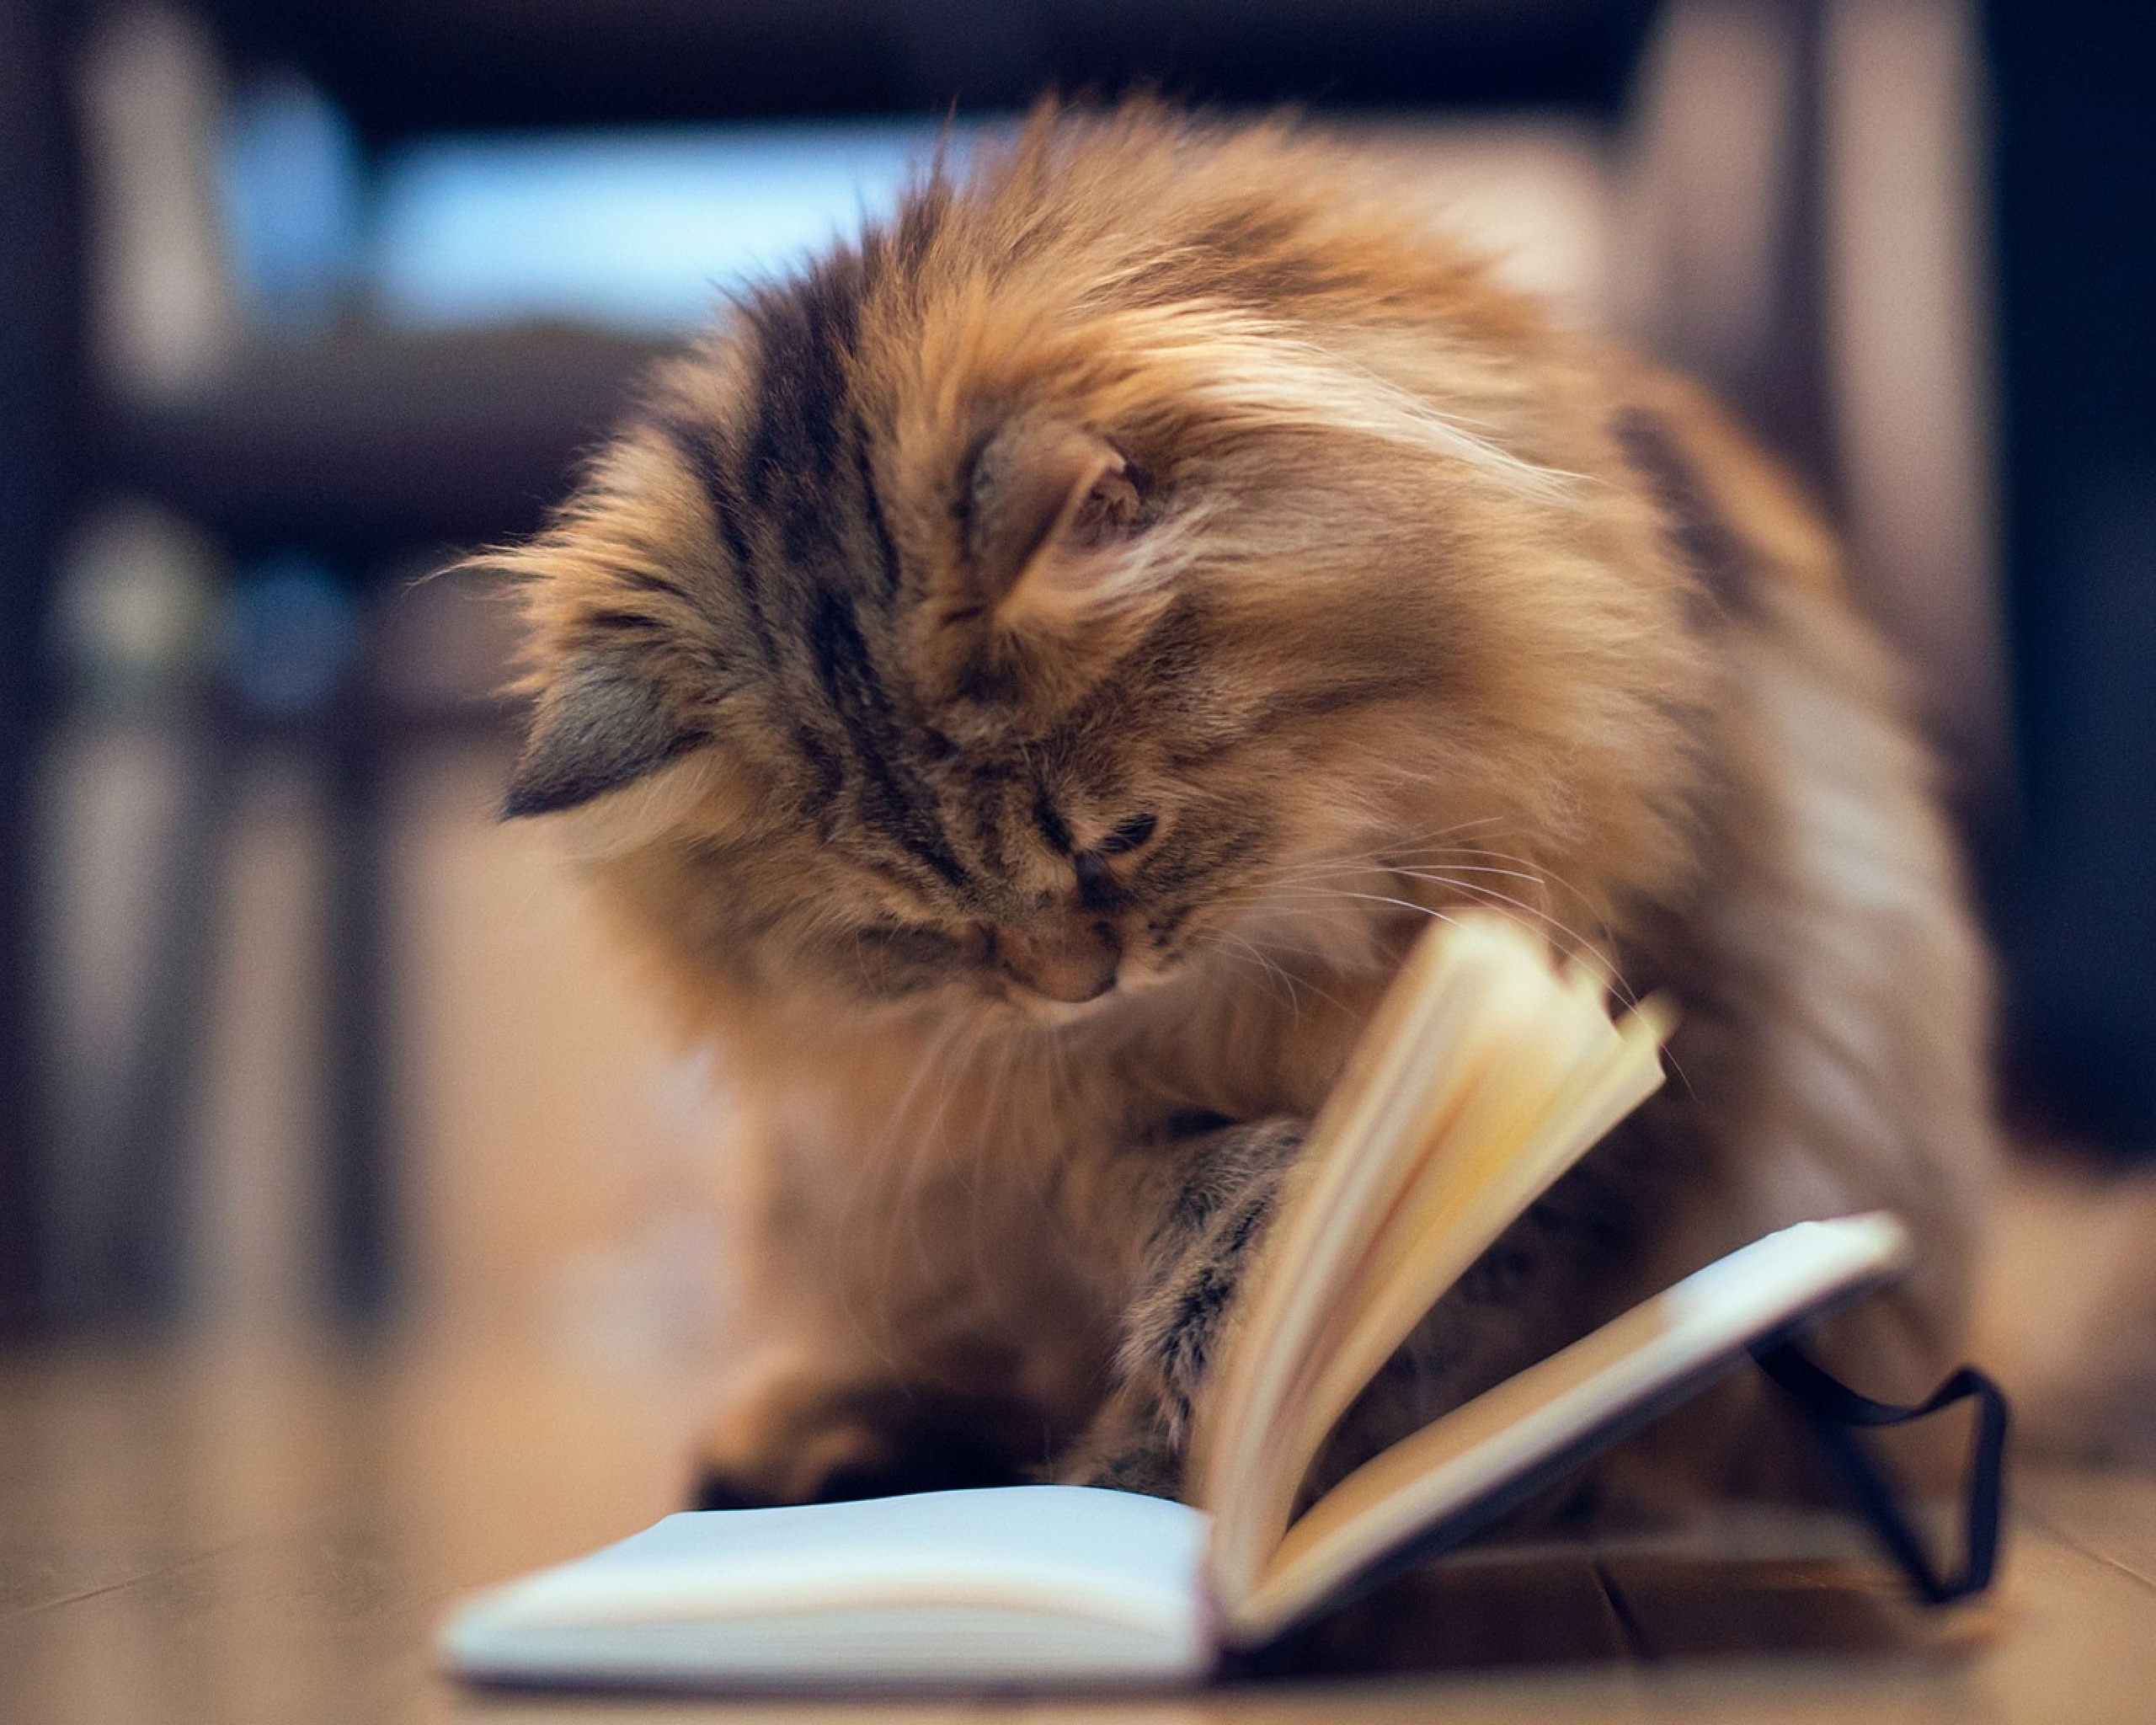 Image: Cat, hair, ears, fluffy, book, sitting, looking